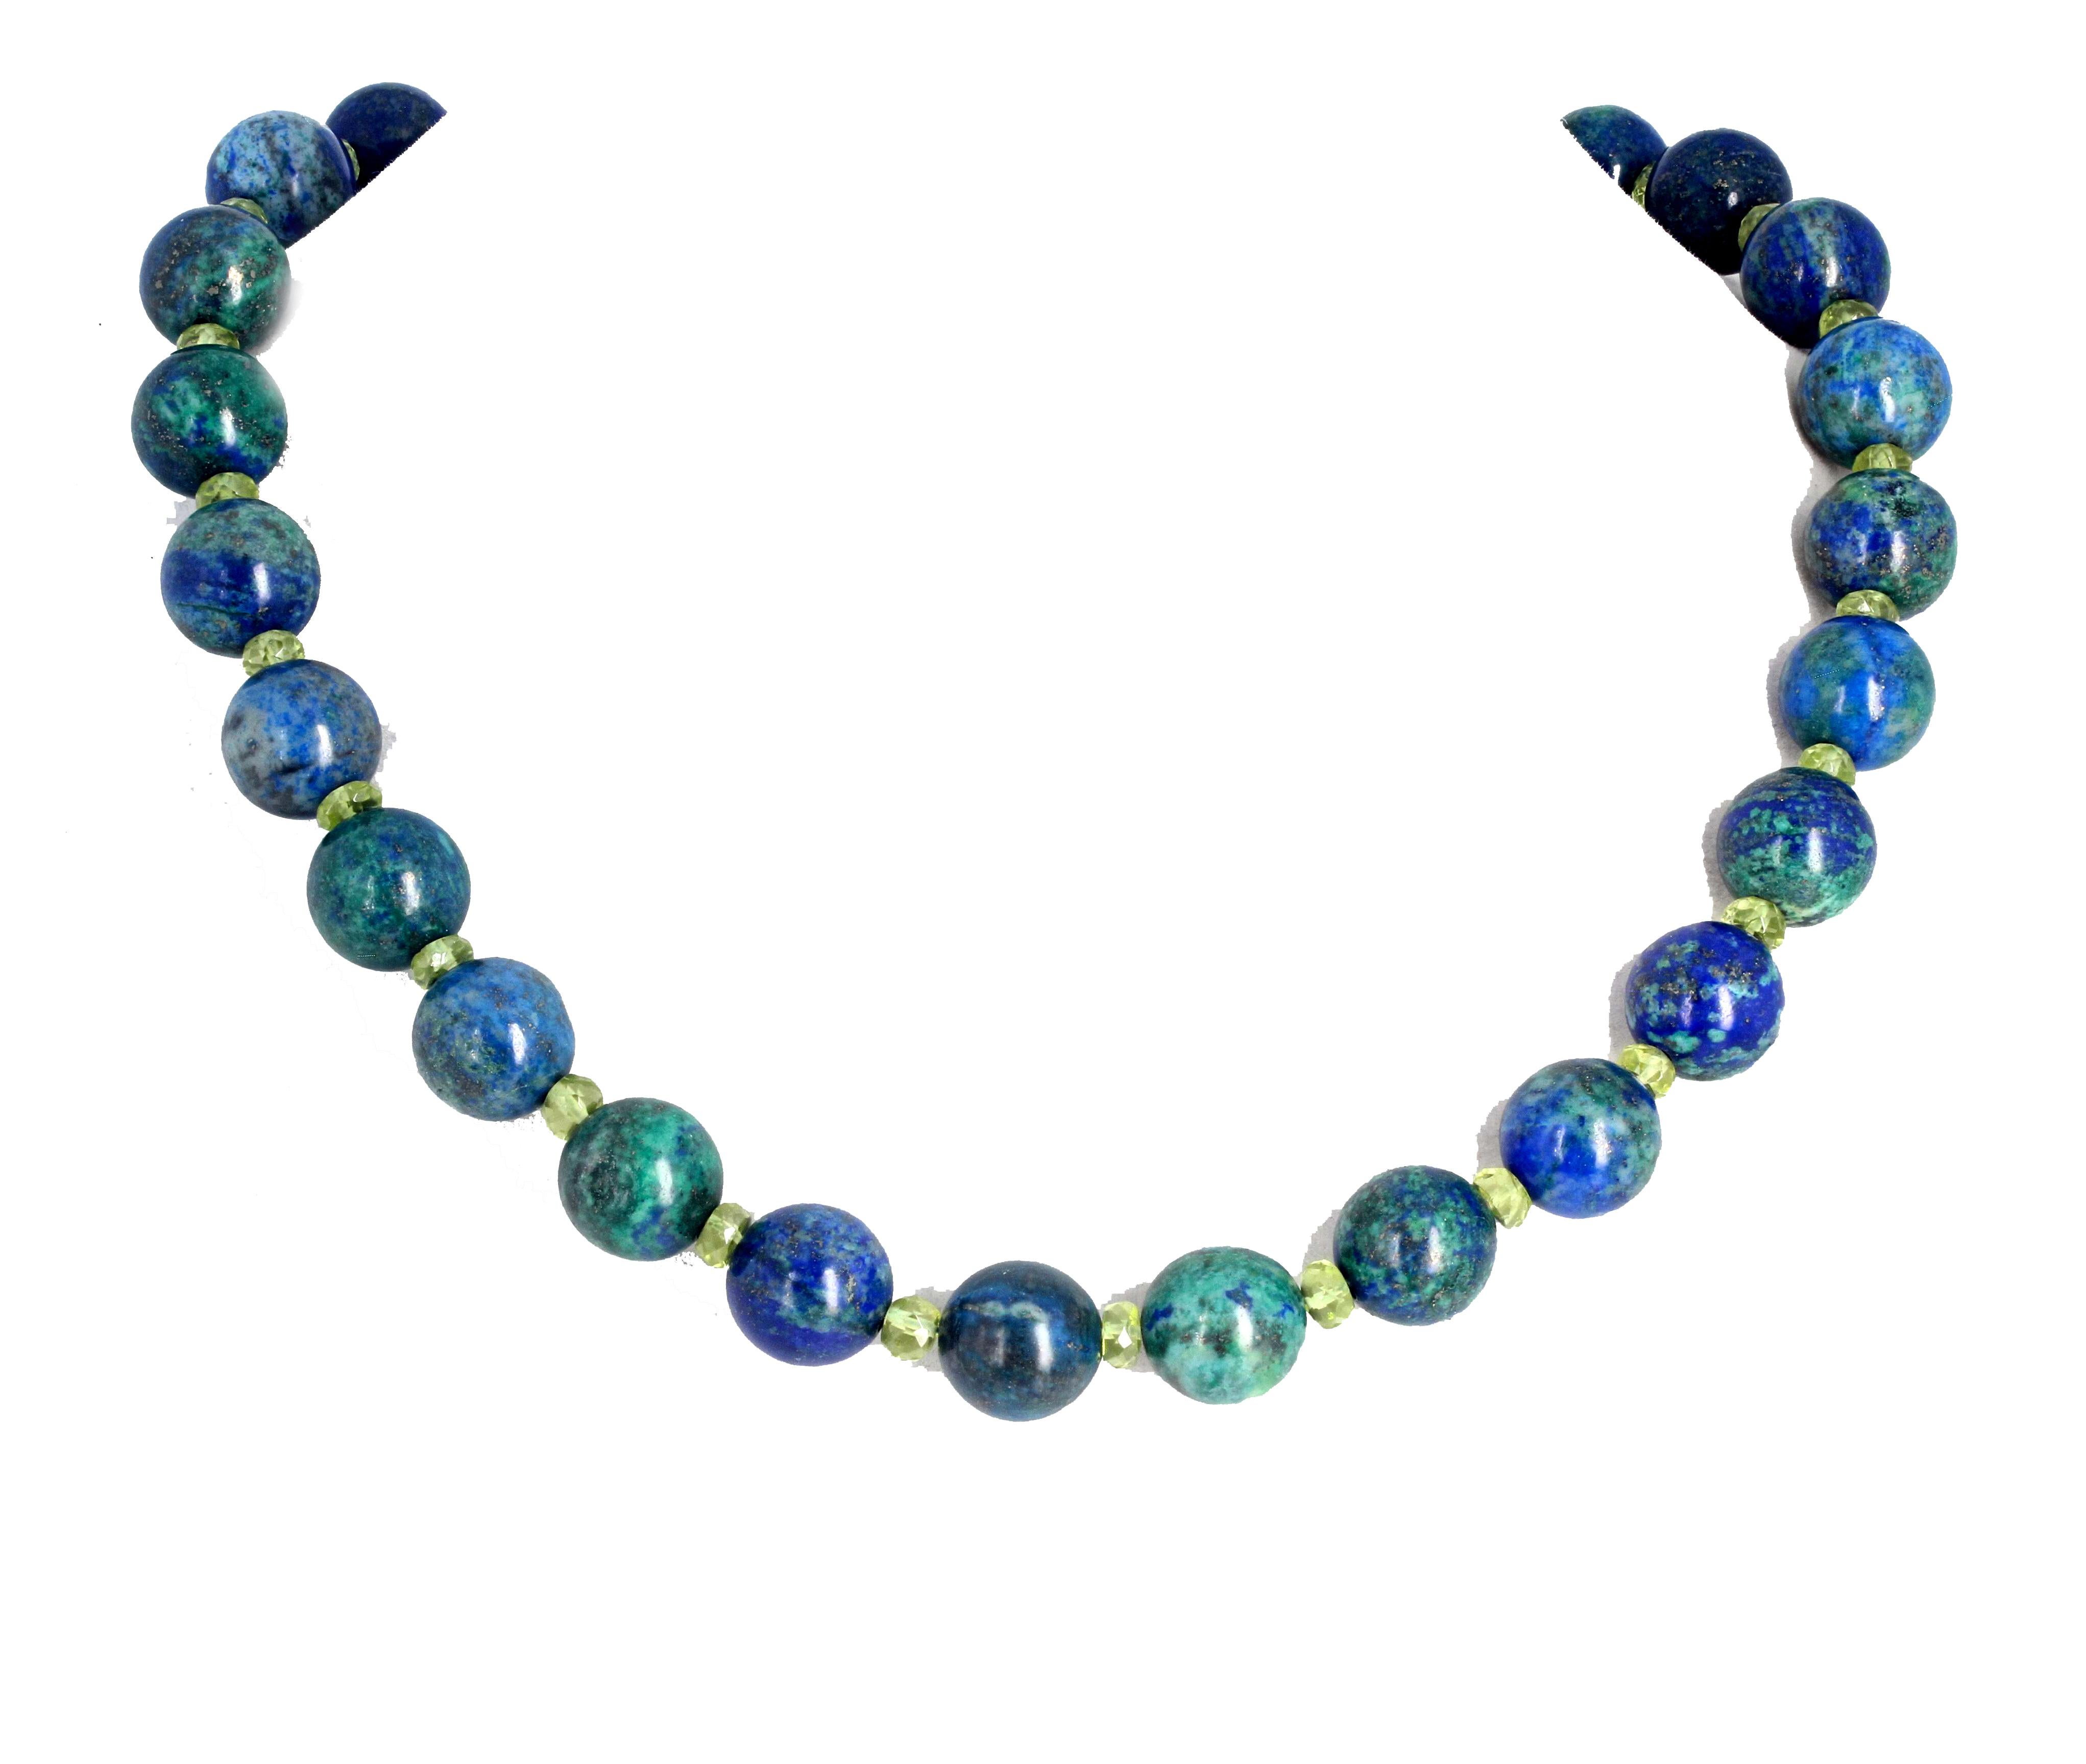 These amazingly highly polished glistening blue and green natural Azurites are 12.2mm in diameter and are set with a sterling silver easy-to-use hook clasp on this 18 inch long necklace.  If you wish faster delivery on your purchase choose UPS to